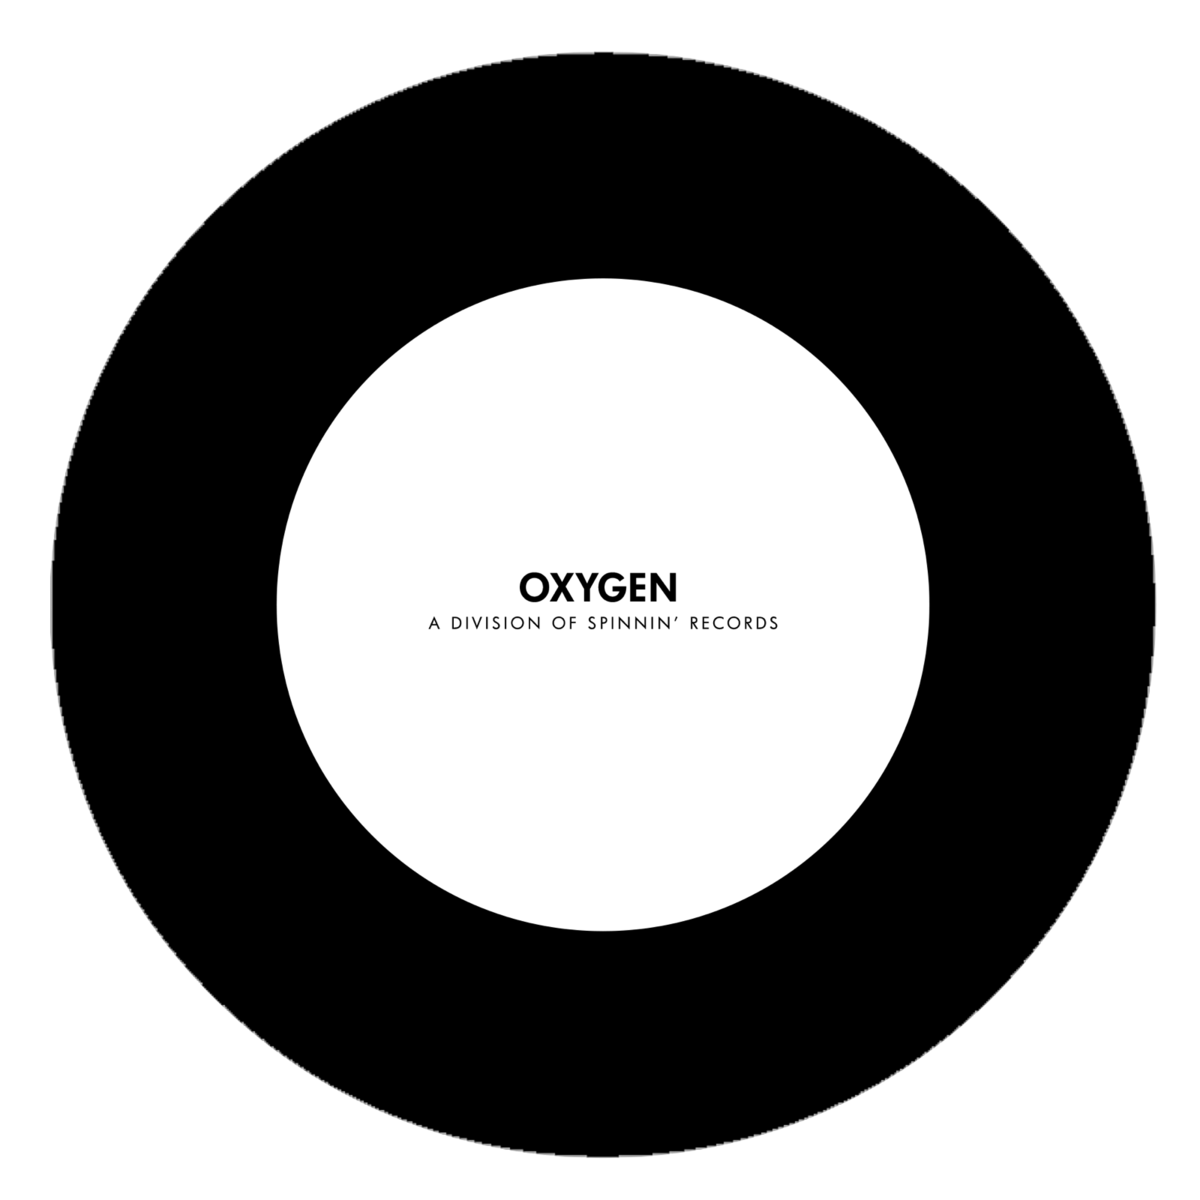 File:Oxygen (record label) logo 2014.png - Wikimedia Commons